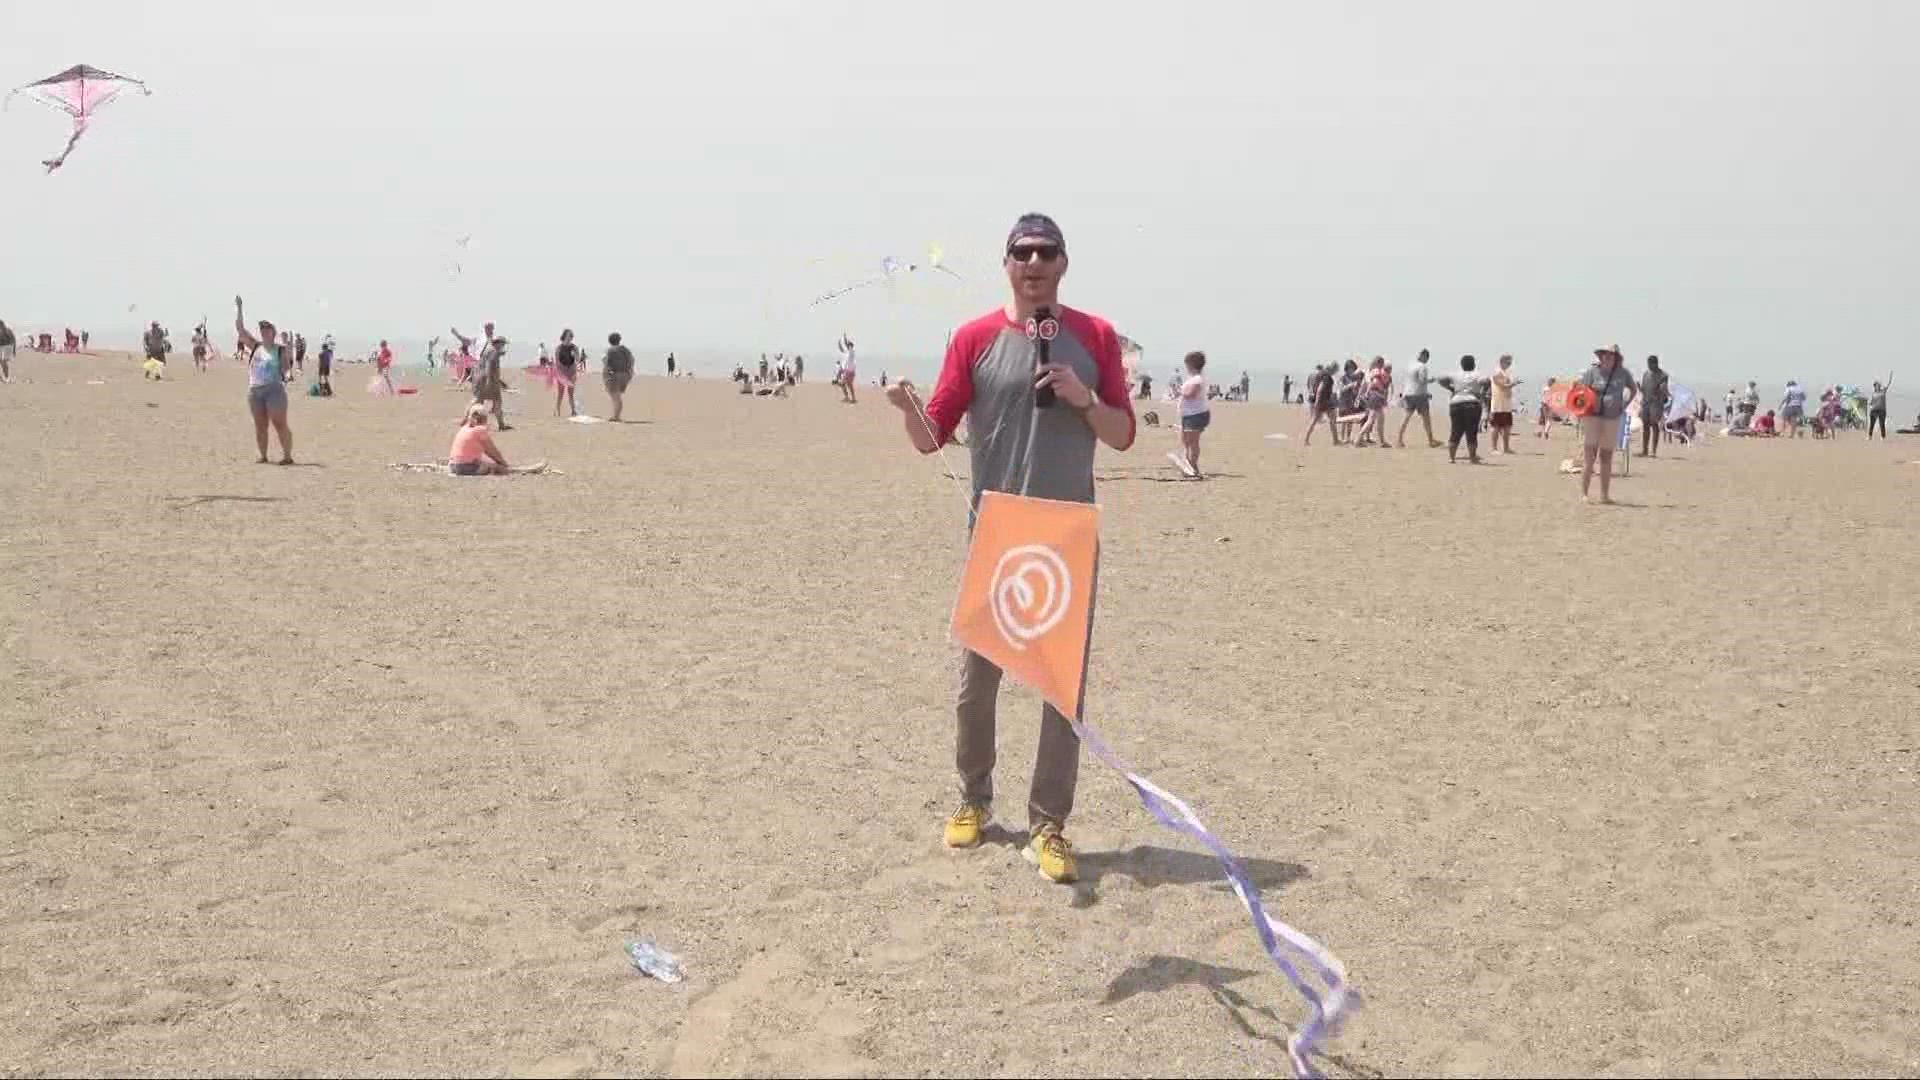 Thousands of kites were in the air over the weekend in Mentor. Crossroads Health hosted a fundraising event that also sought to break a world record.